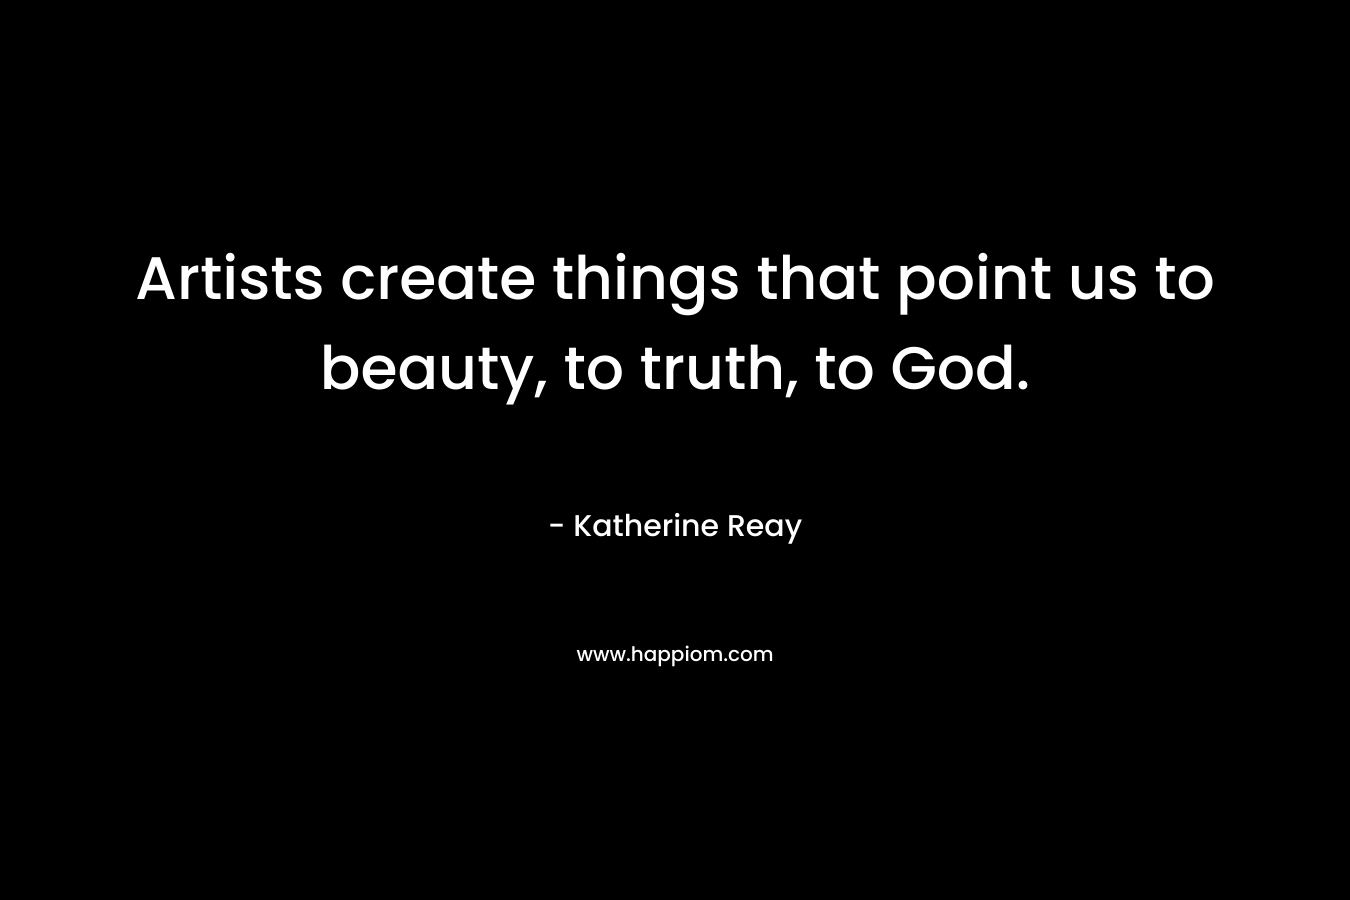 Artists create things that point us to beauty, to truth, to God.